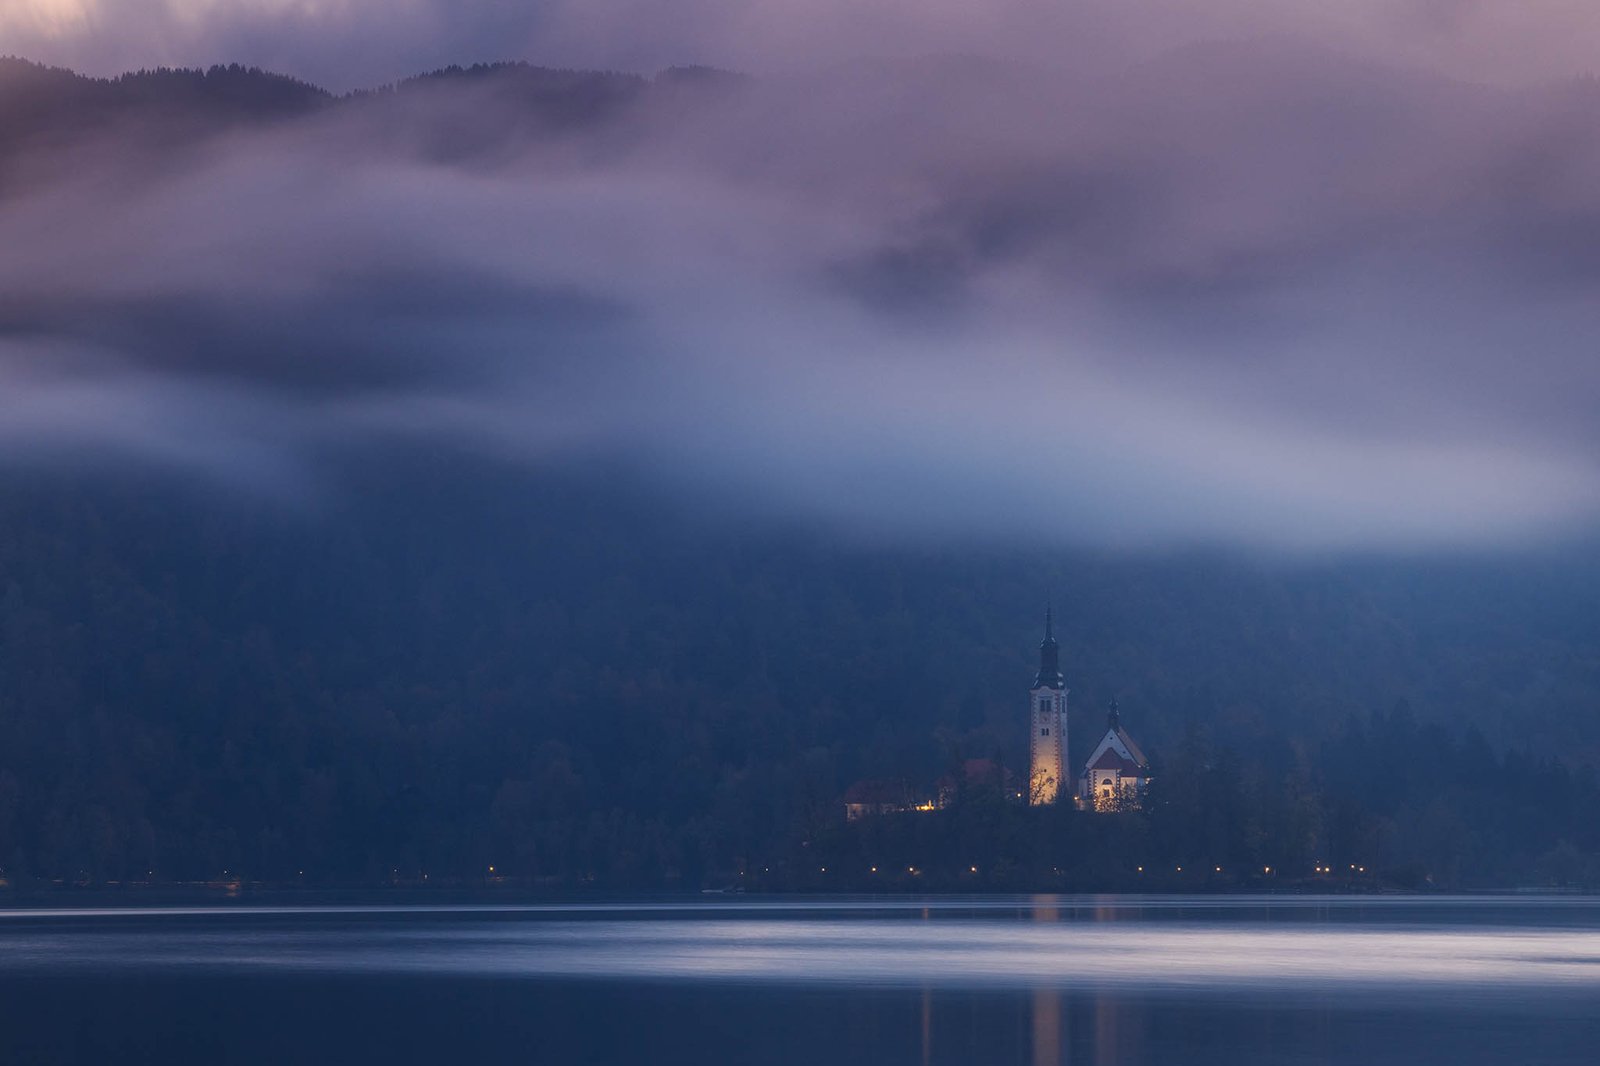 View across the beautiful Lake Bled, island church at sunset, Slovenia. Lake Bled is Slovenia's most popular tourist destination.